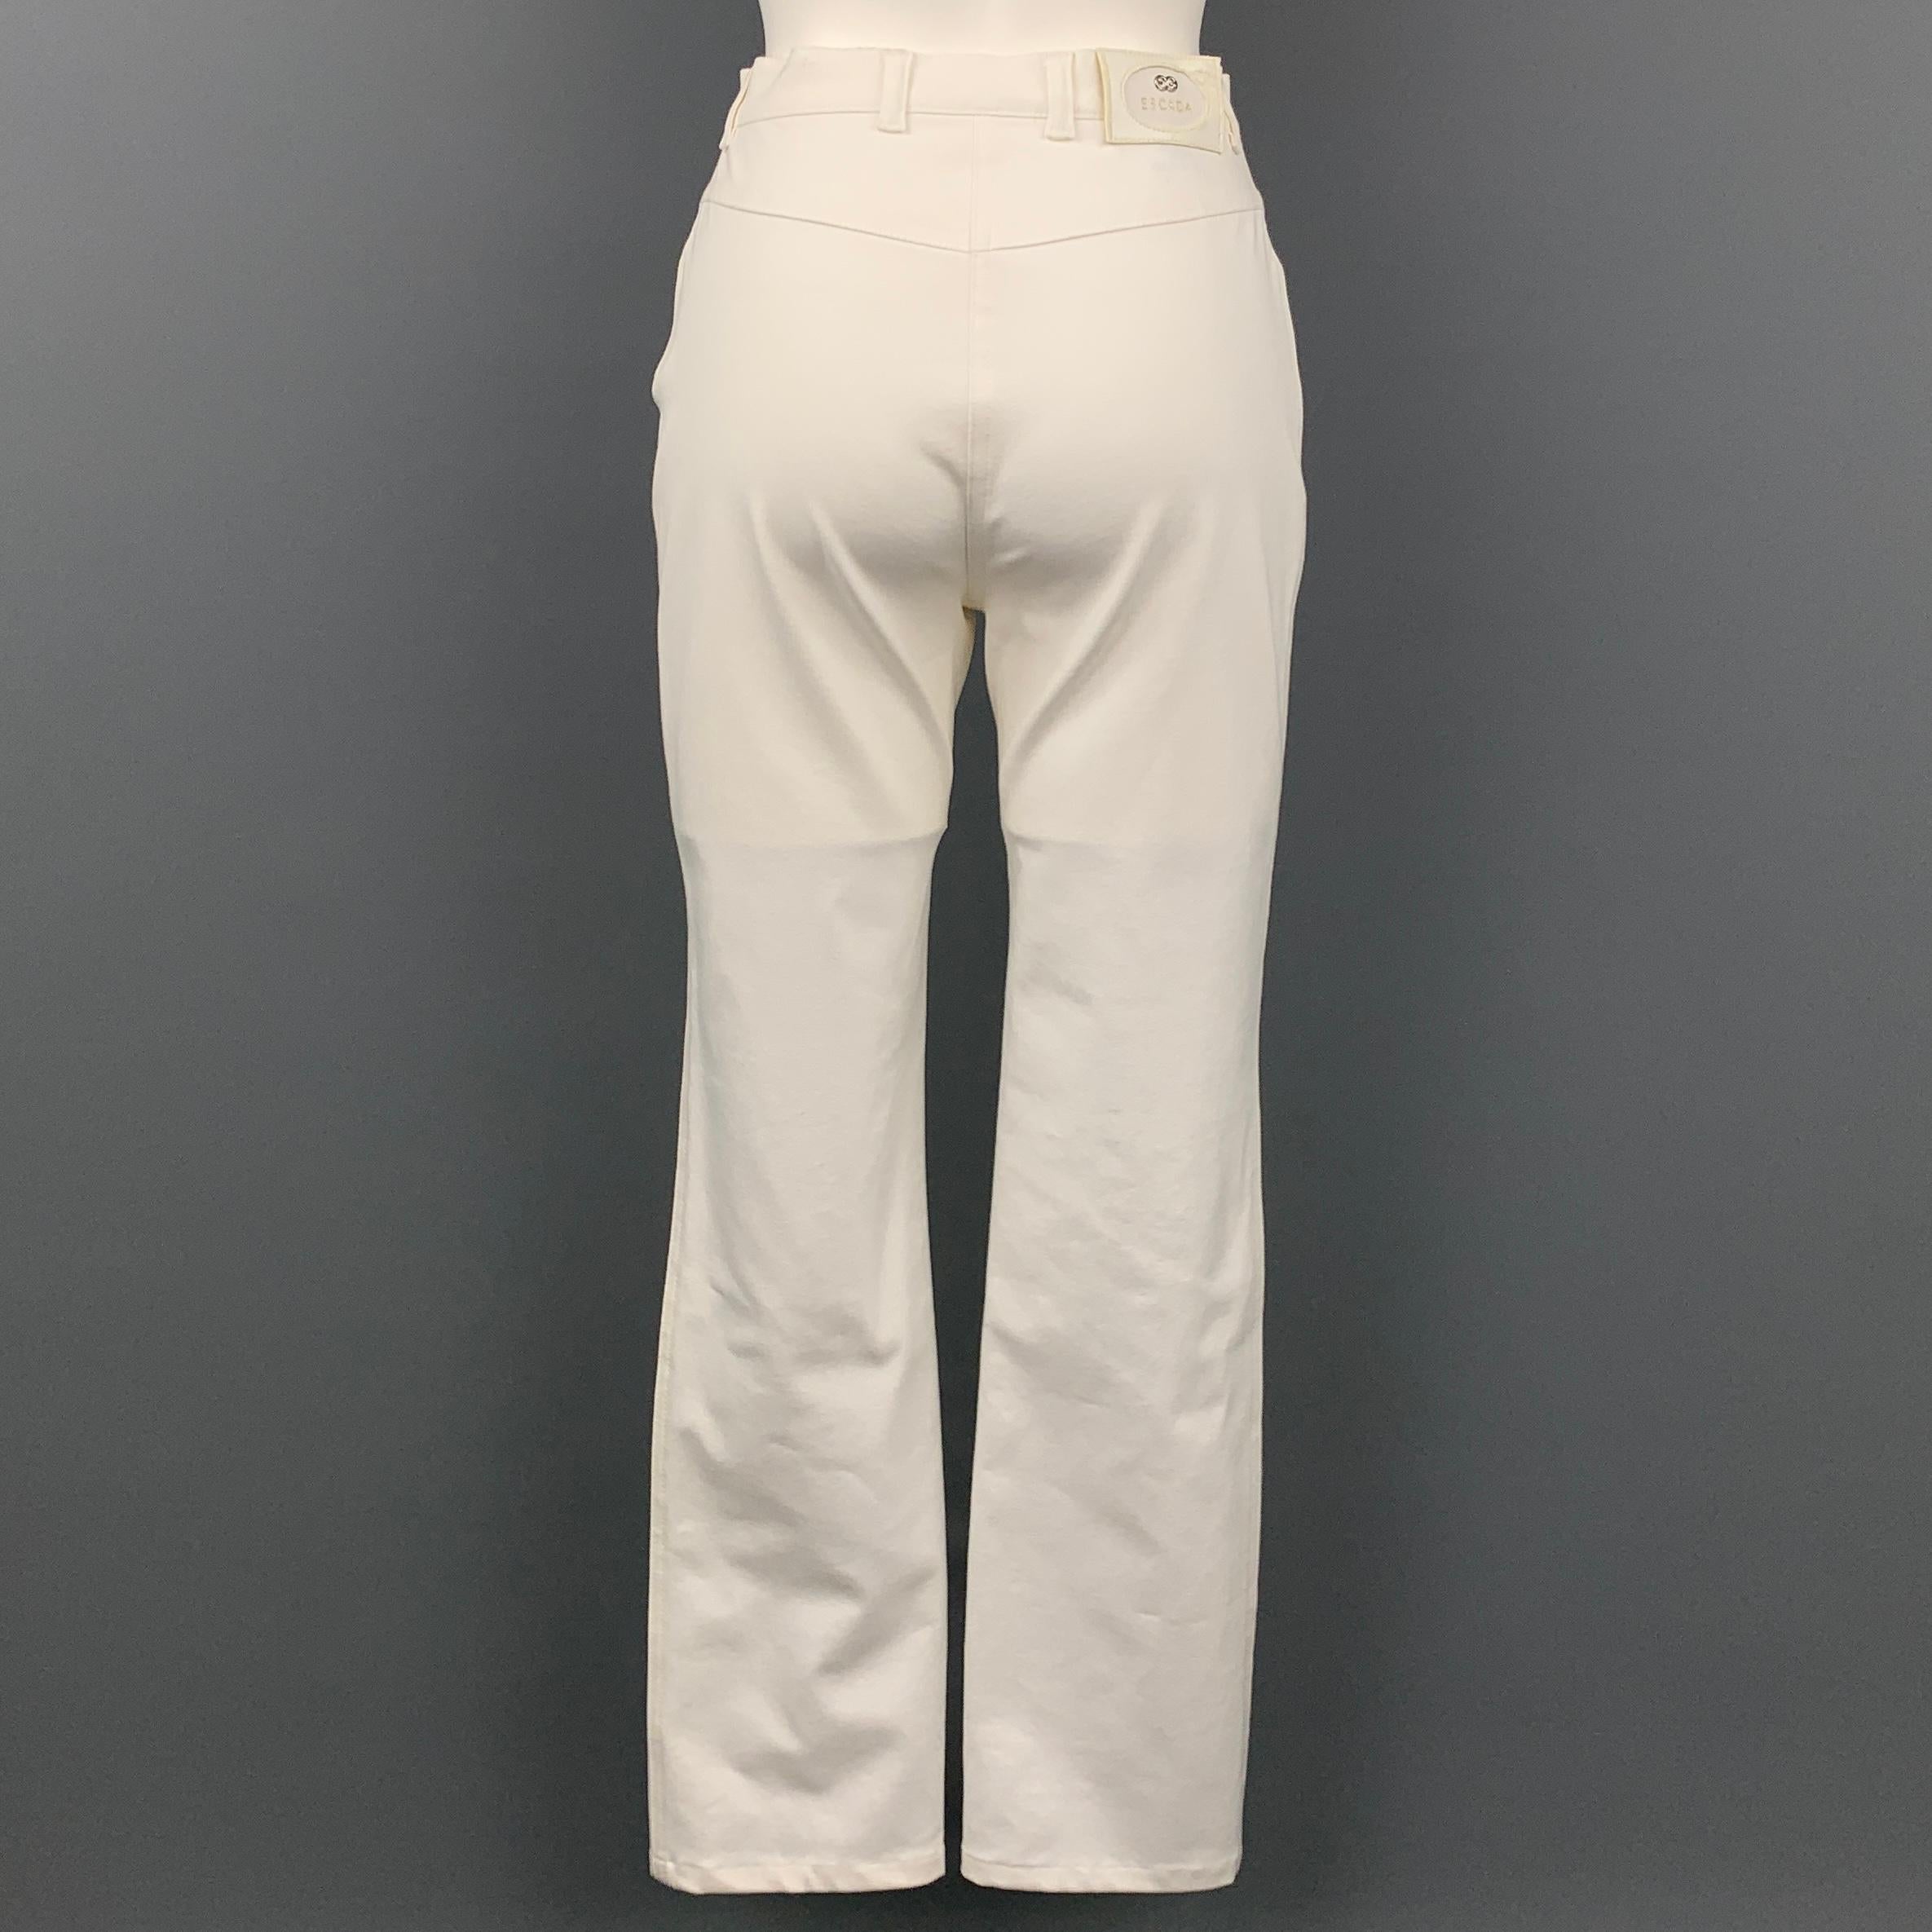 ESCADA dress pants comes in a white stretch cotton featuring a straight leg, gold tone hardware, and a zip fly closure.

Very Good Pre-Owned Condition.
Marked: 34

Measurements:

Waist: 26 in.
Rise: 10 in.
Inseam: 30 in.  